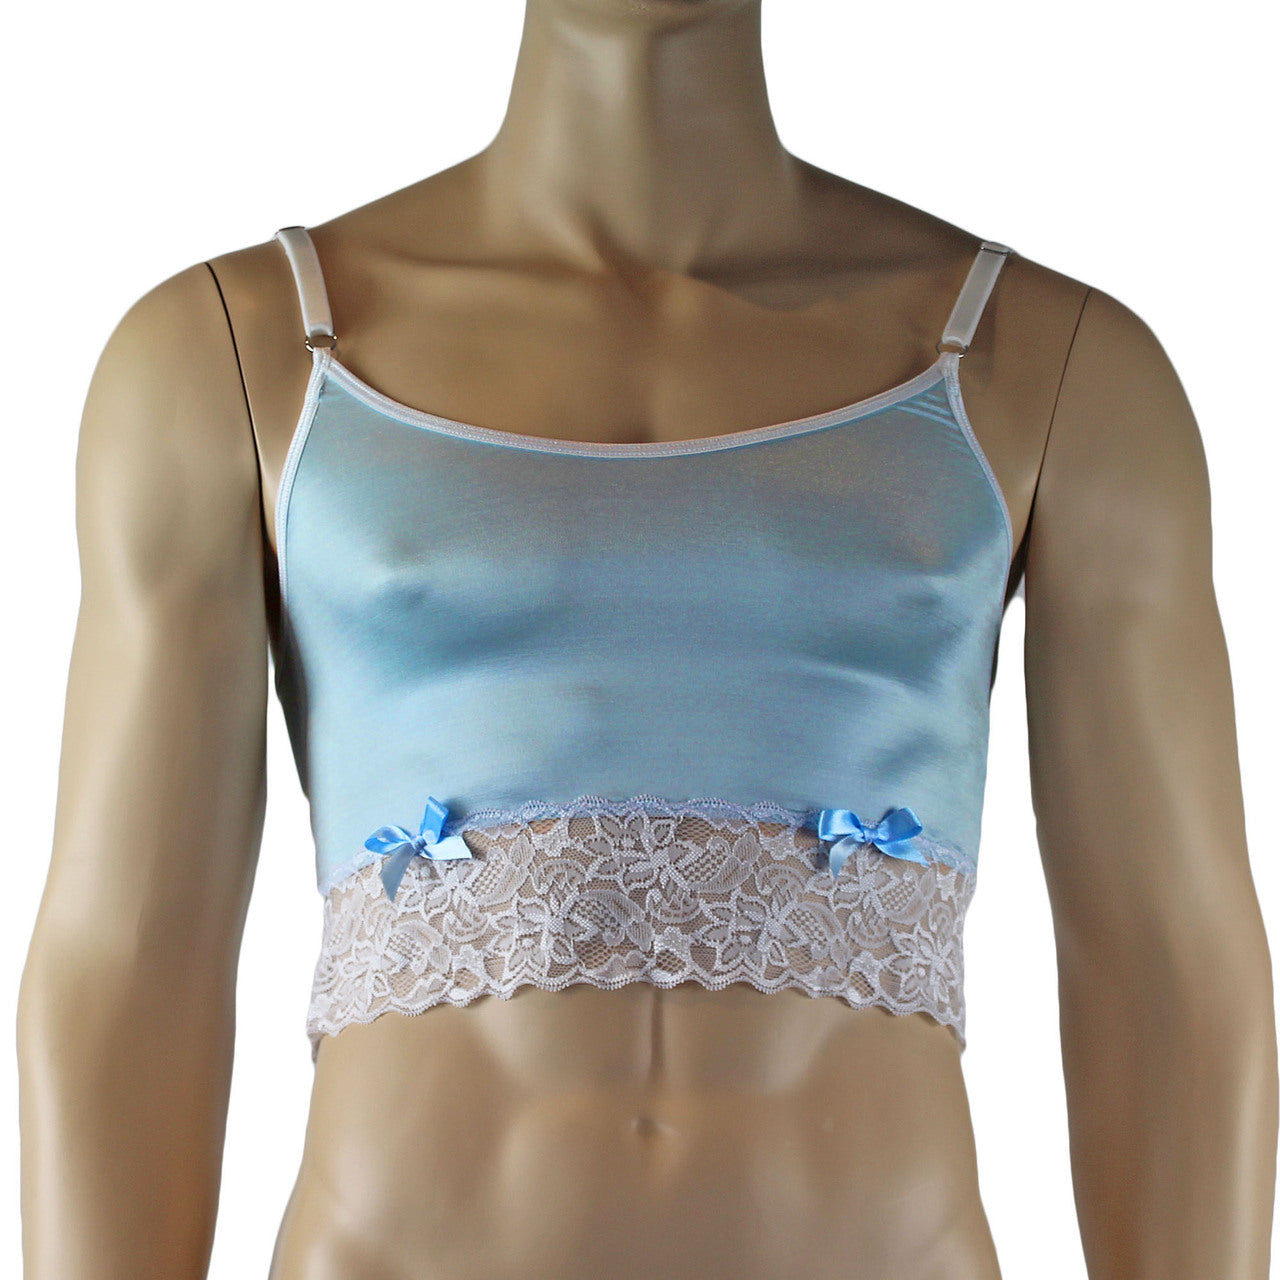 Mens Joanne Satin & Lace Crop Cami Top - Sizes up to 3XL Light Blue and White Lace